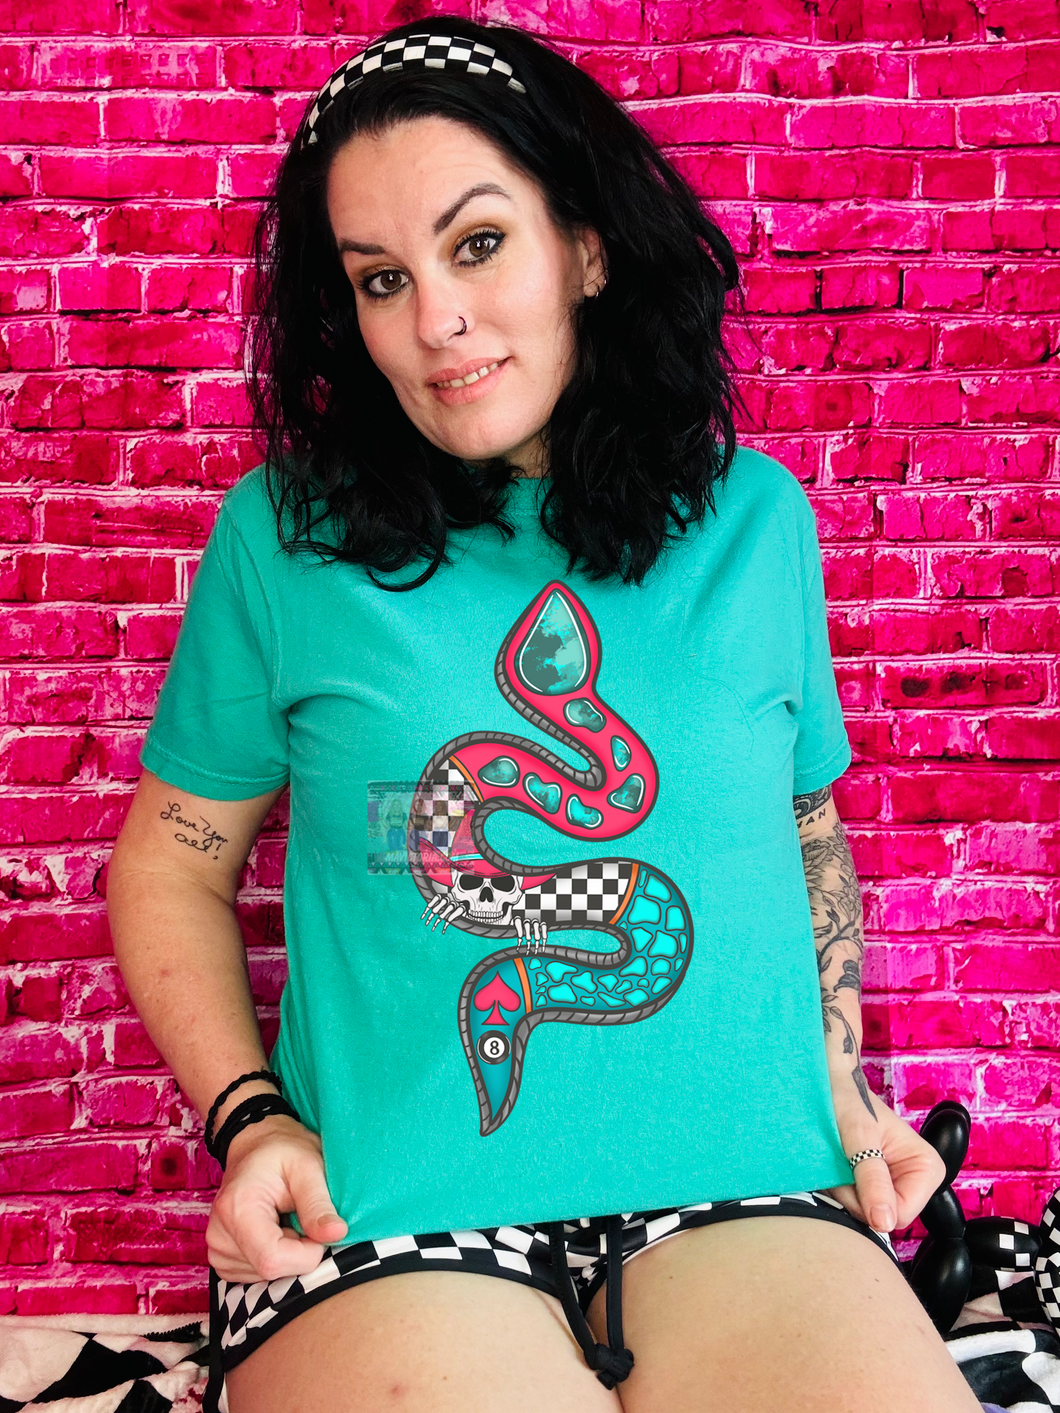 Western checkered turquoise stone and neon pink snake on teal comfort colors graphic tee - shorts available under style - Mavictoria Designs Hot Press Express